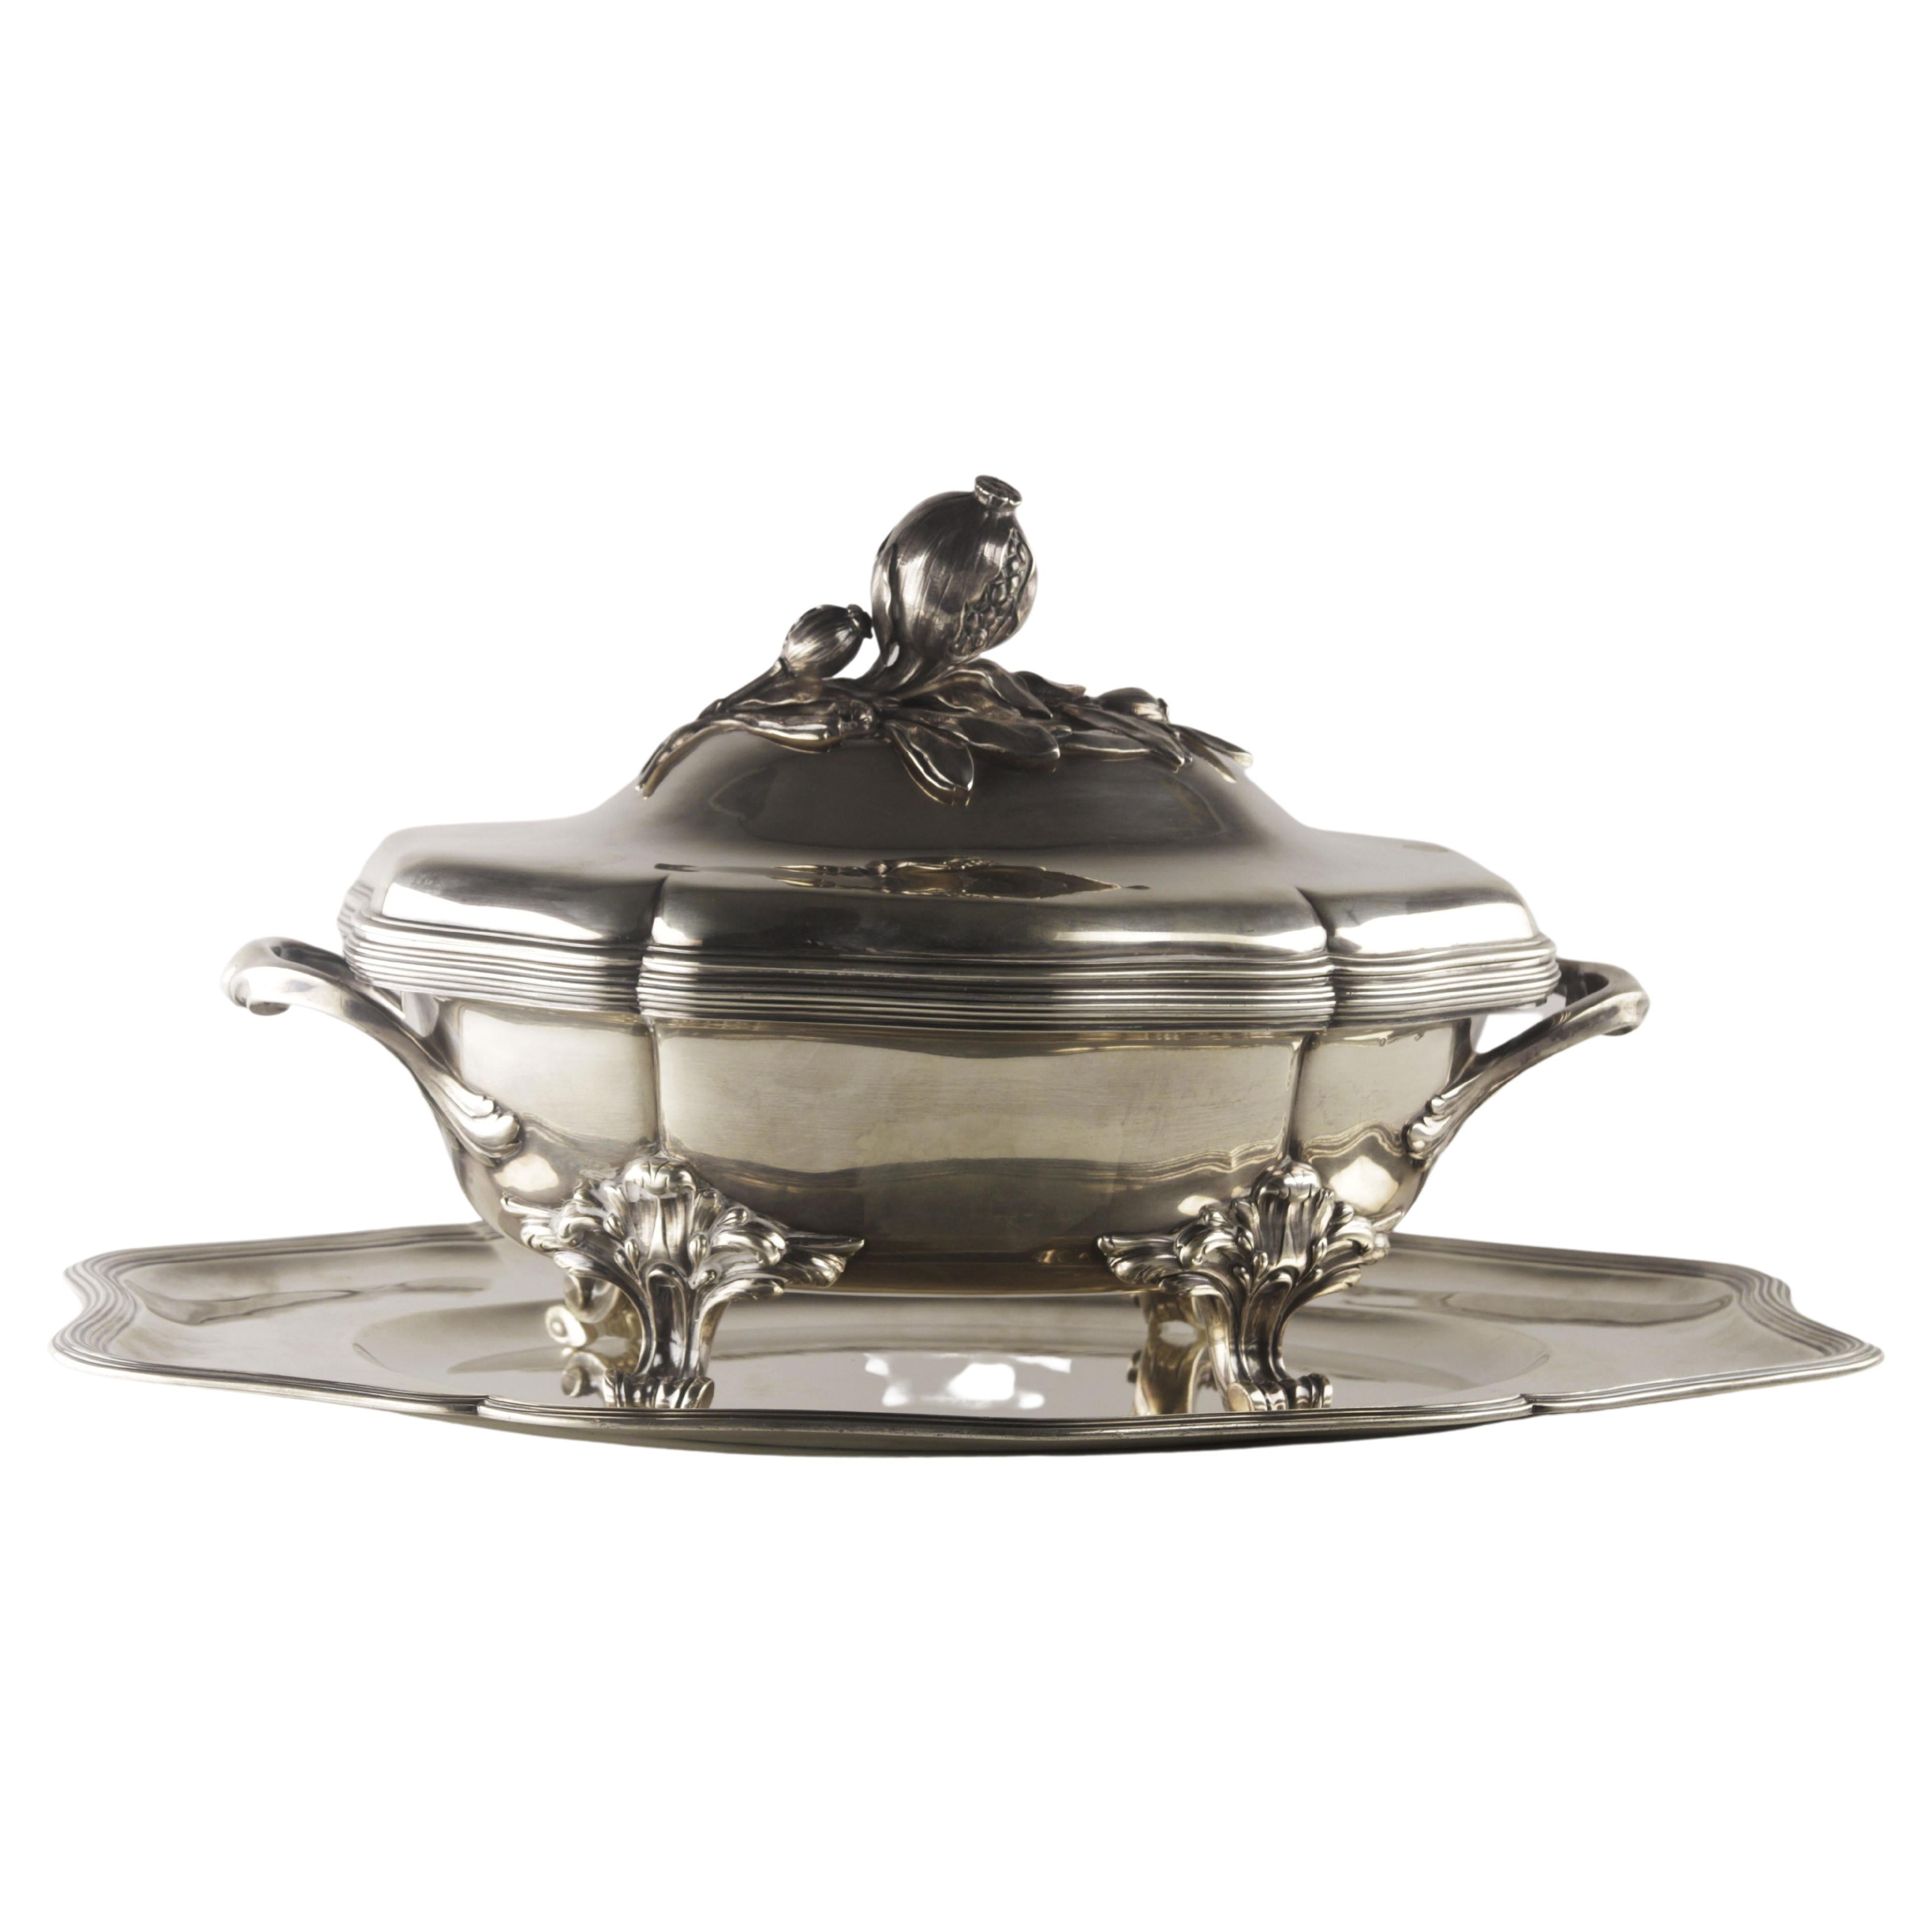 Solid silver tureen and presentoire
Origin France Circa 1900
Manufacturer Emile Puiforcat
Perfect Condition Art Nouveau Style
Jean-Emile Puiforcat (1897 - 1945) was a French cutlery artist and designer. He made his designs in different silver